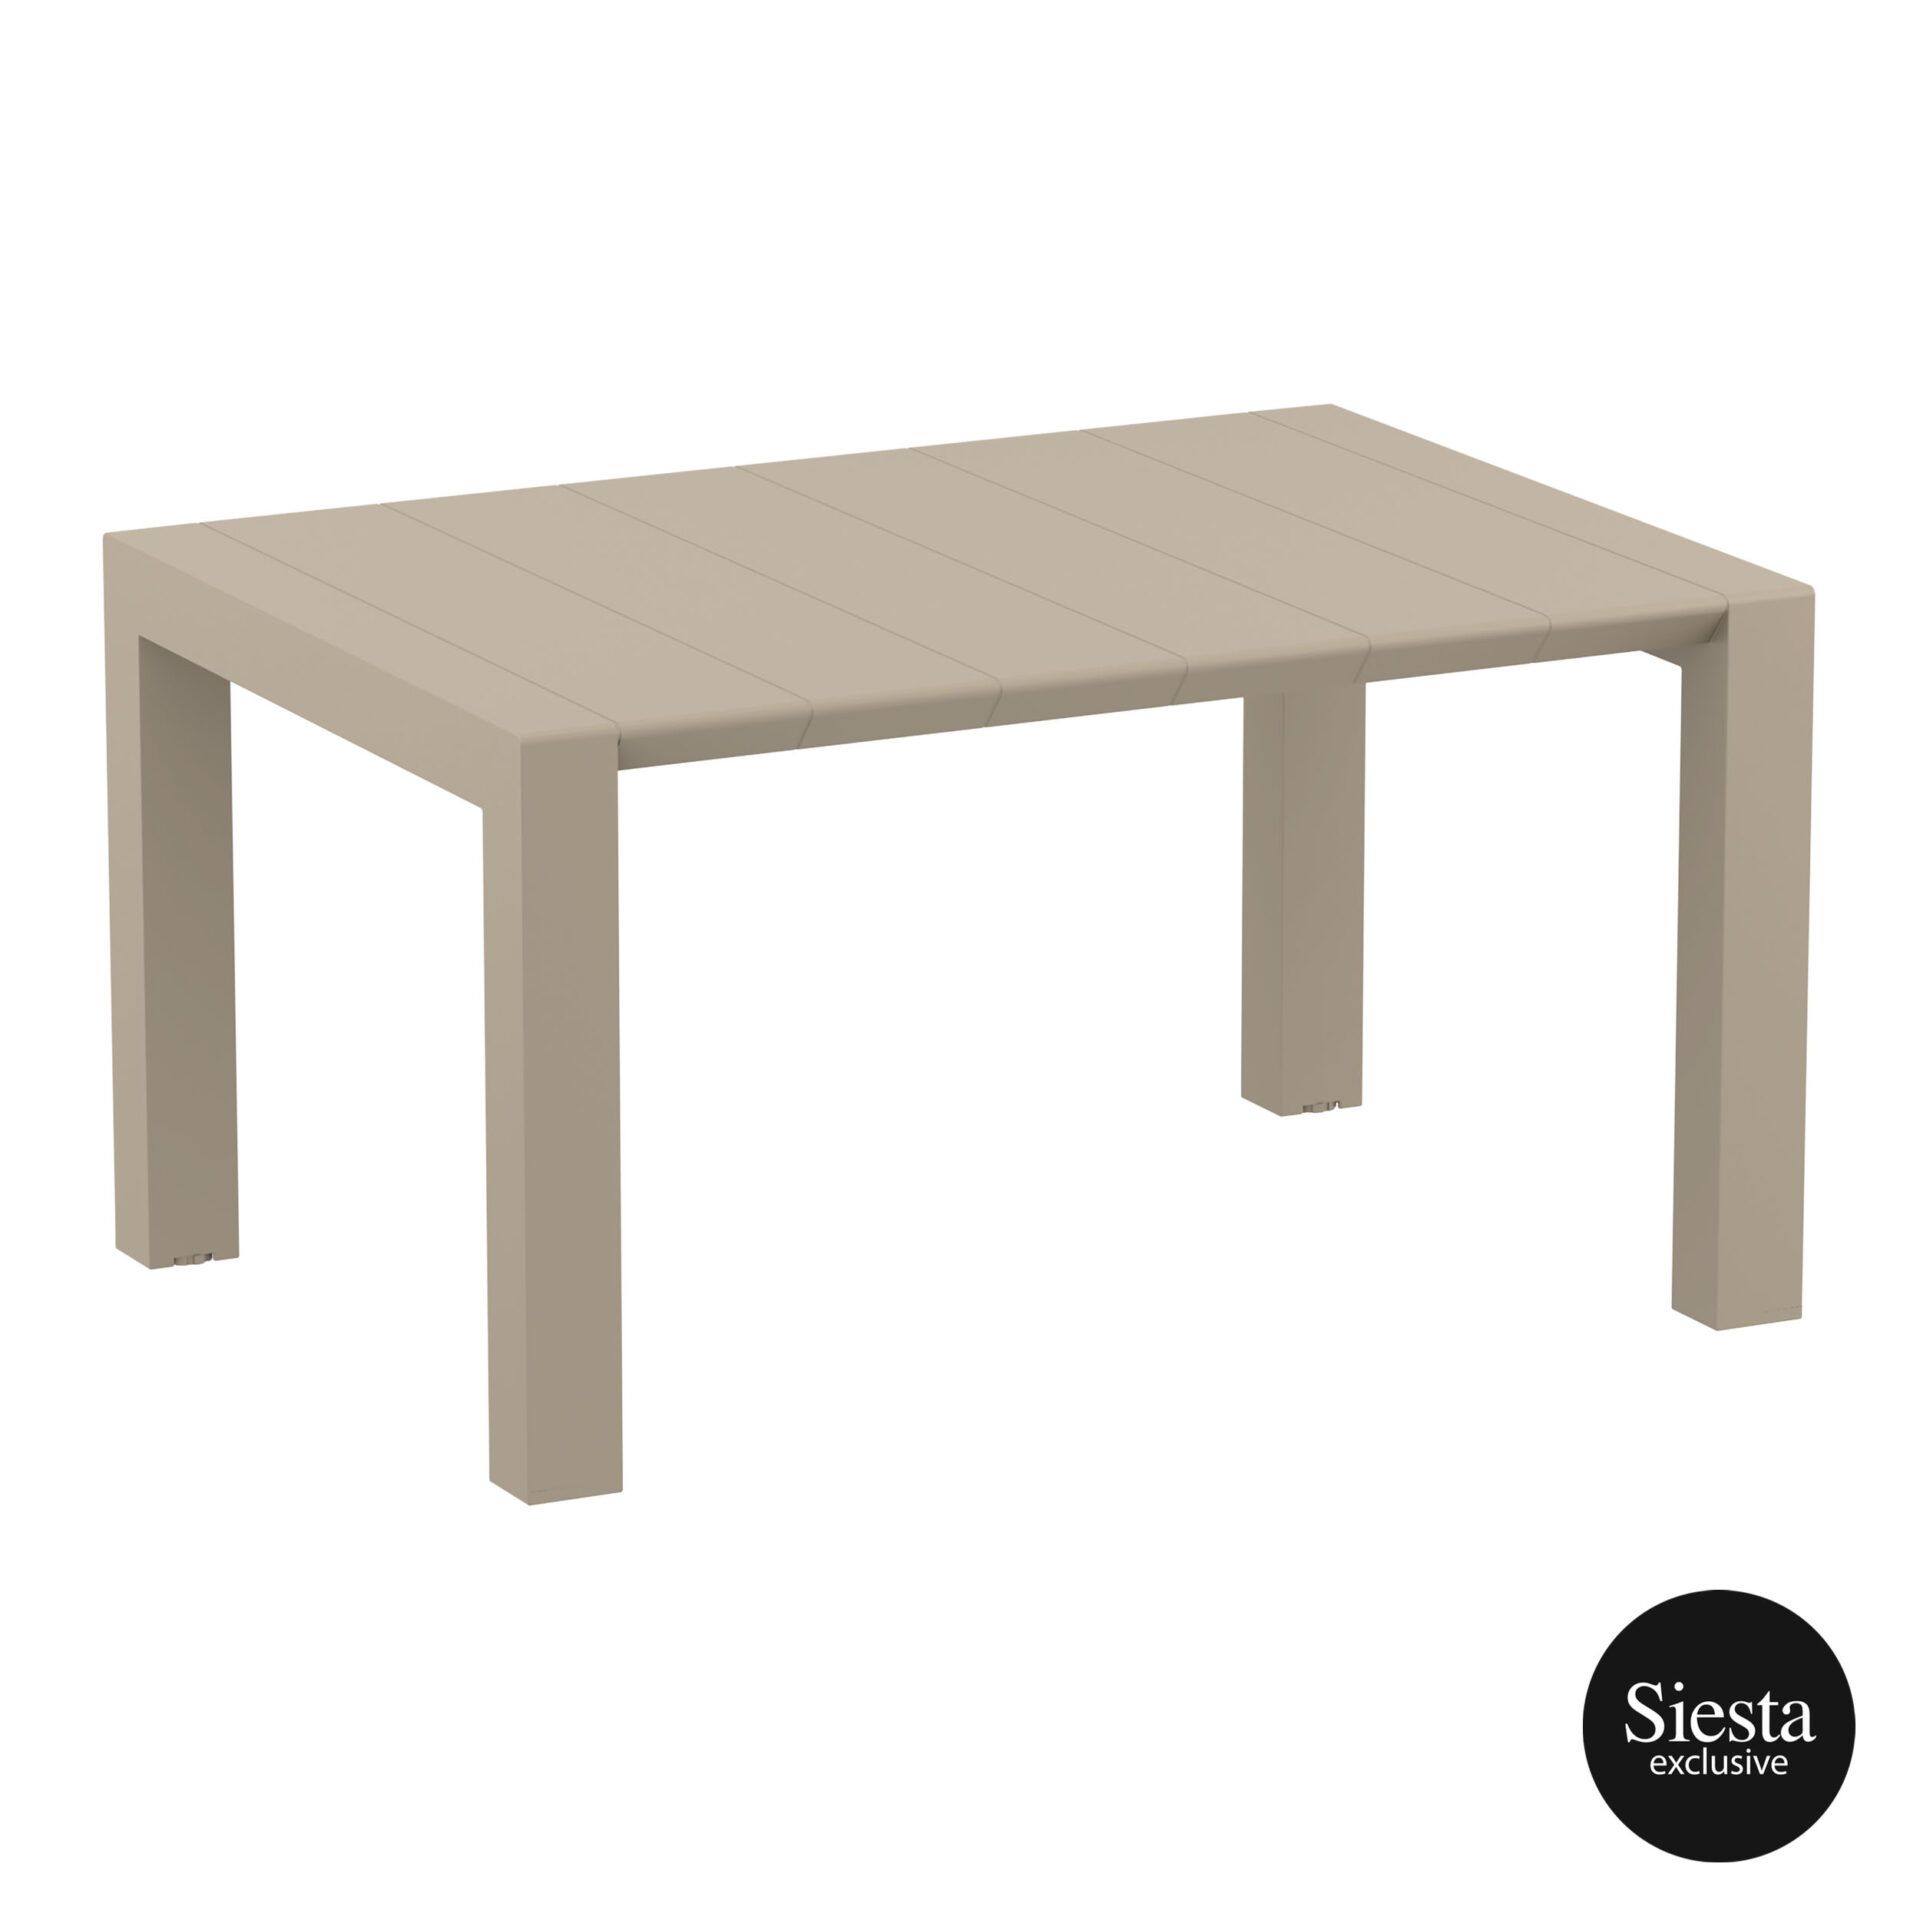 010 vegas table 140 taupe front side